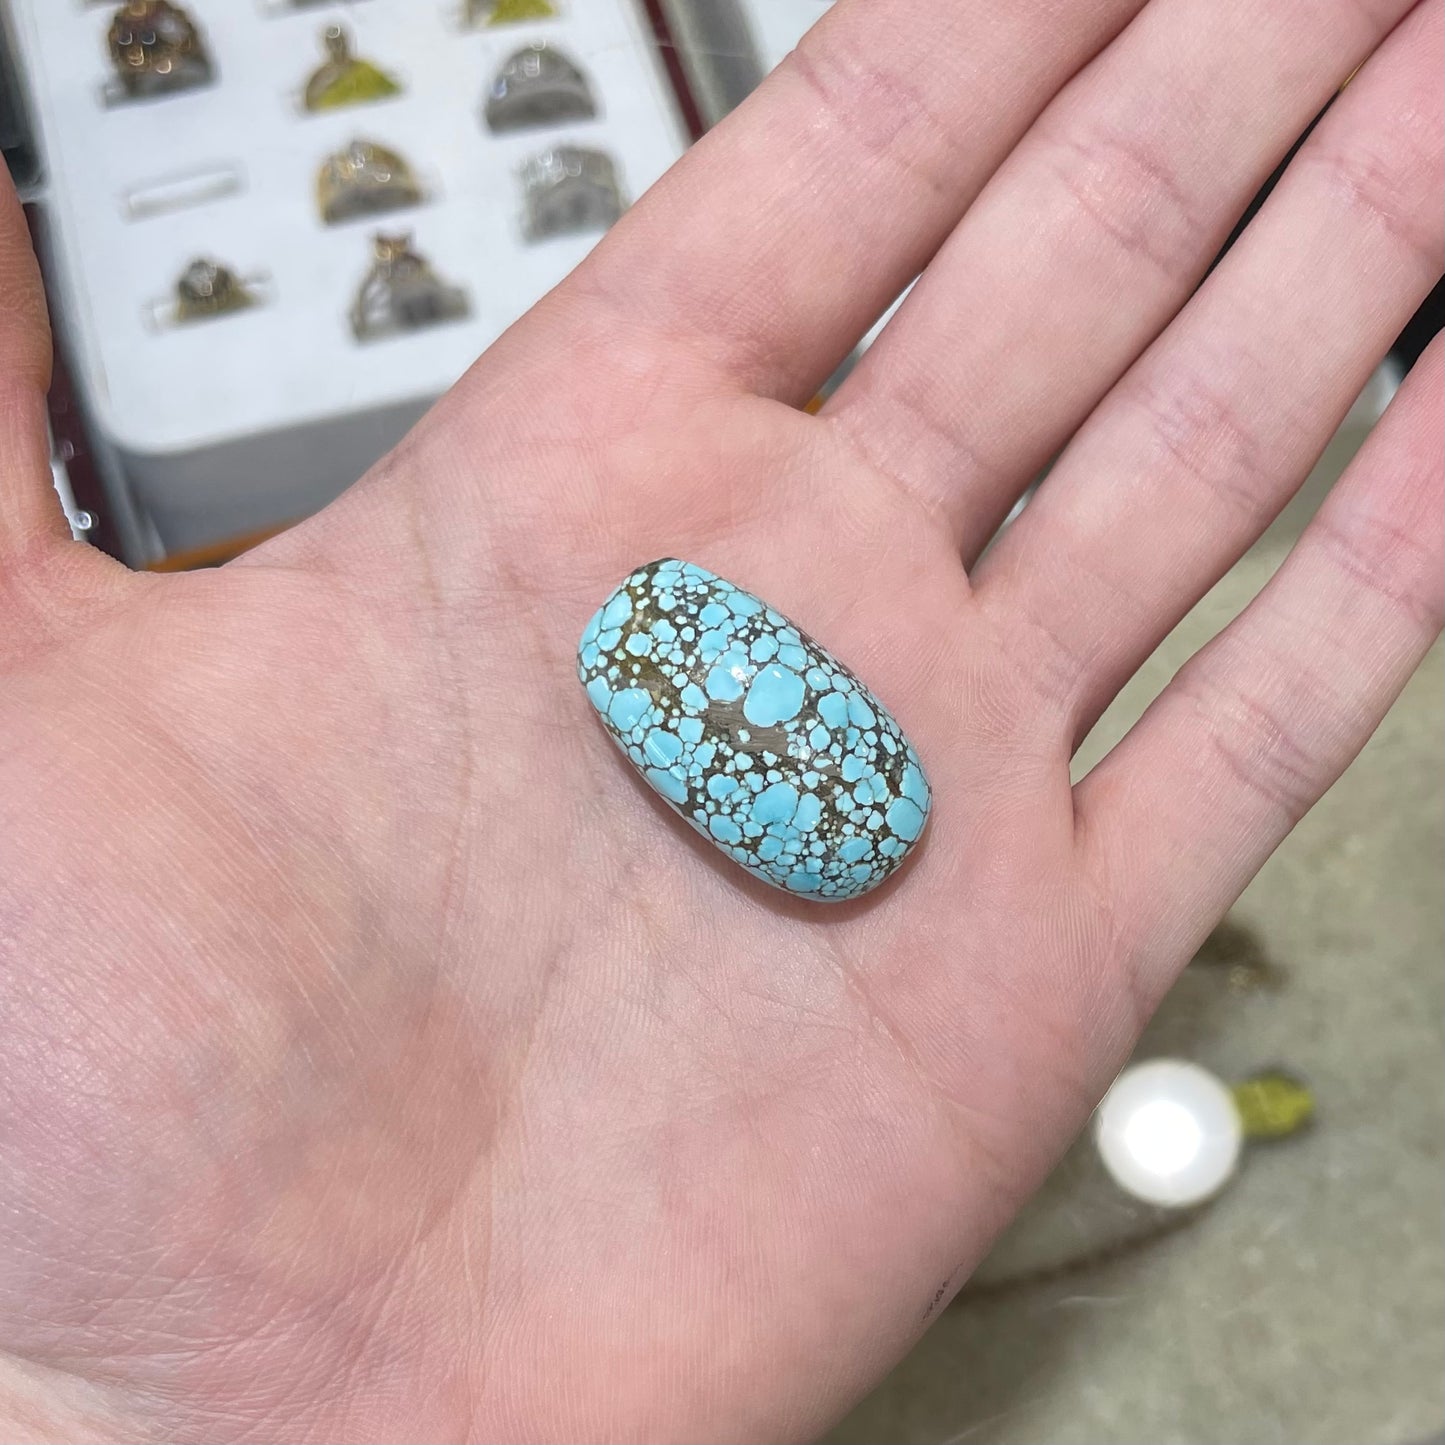 A loose spiderweb turquoise stone from Number 8 Mine in Lander County, Nevada.